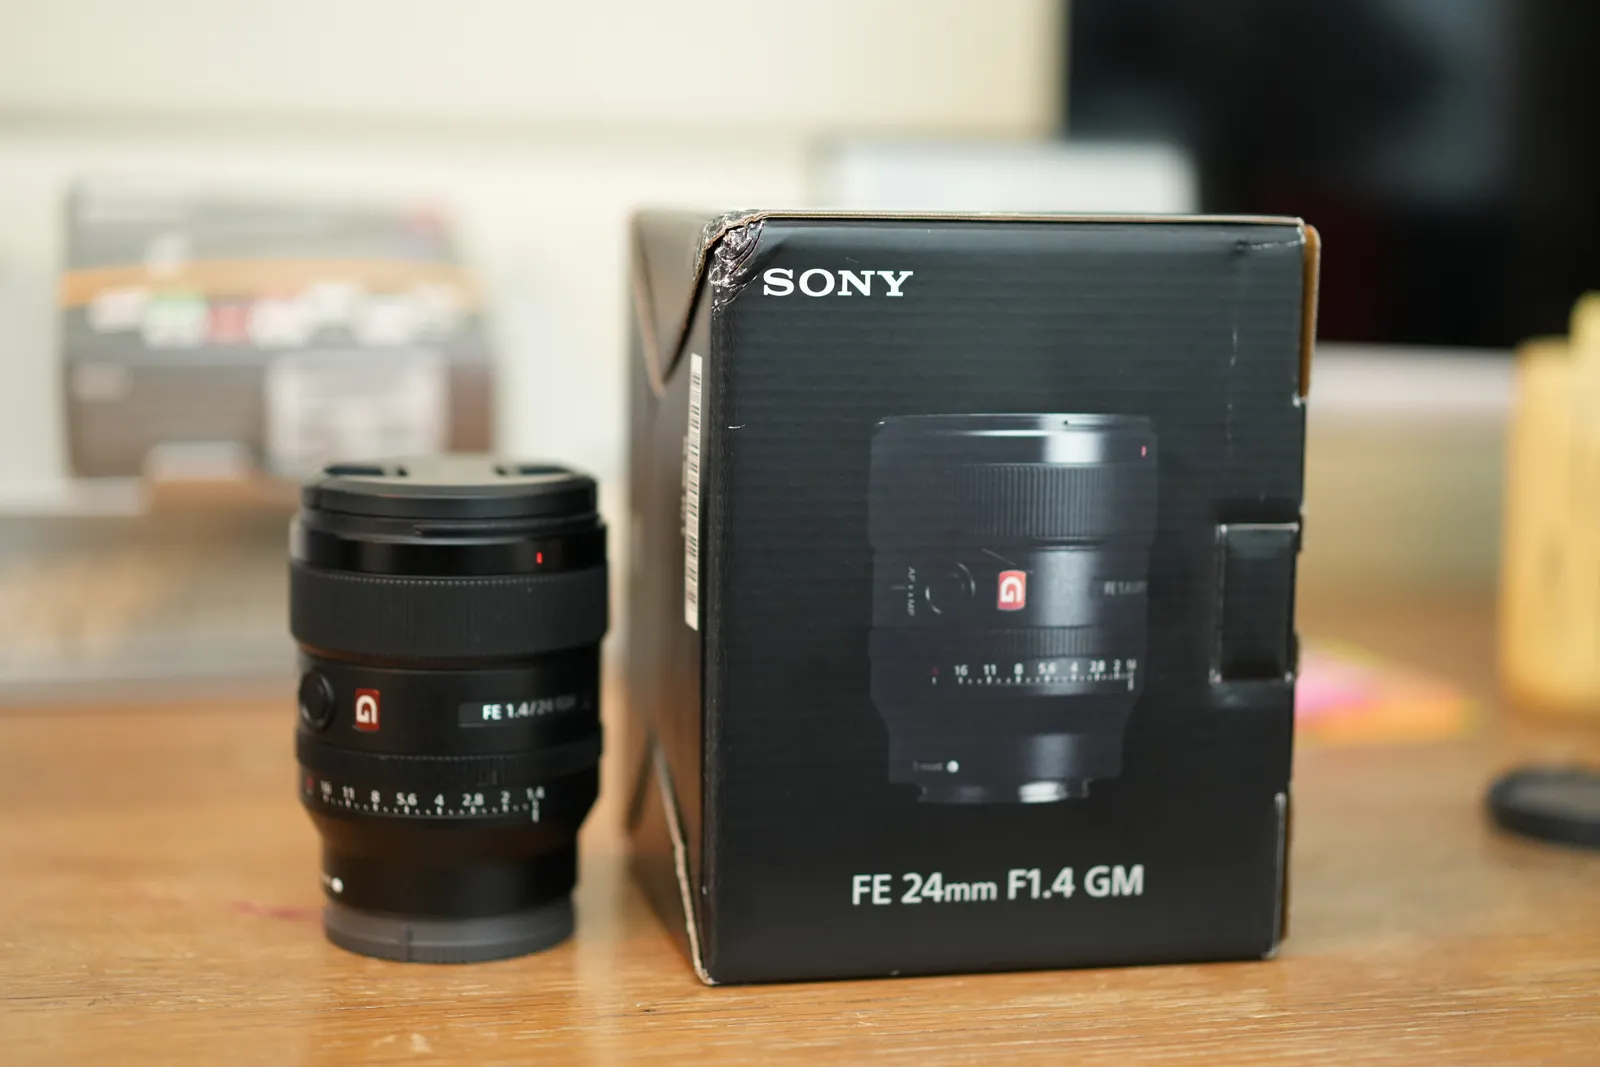 Sony FE 24mm 1.4 GM Lens From noofzilla On Gear Focus